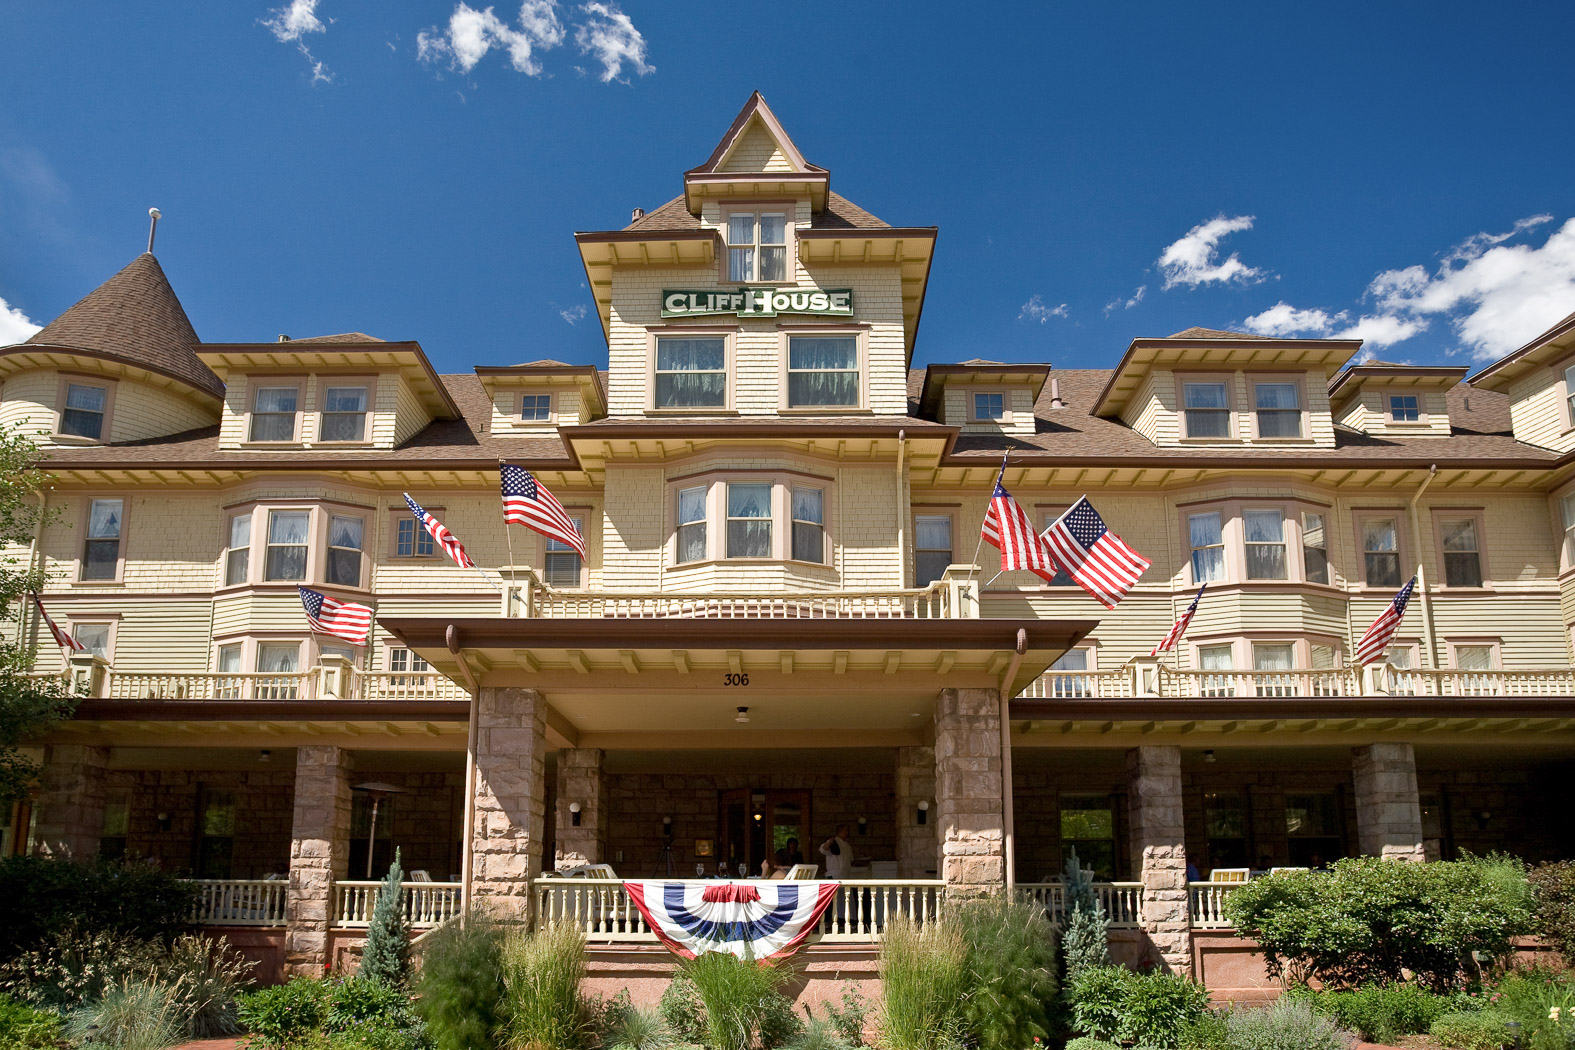 Manitou Springs Hotels | Official Website | The Cliff House